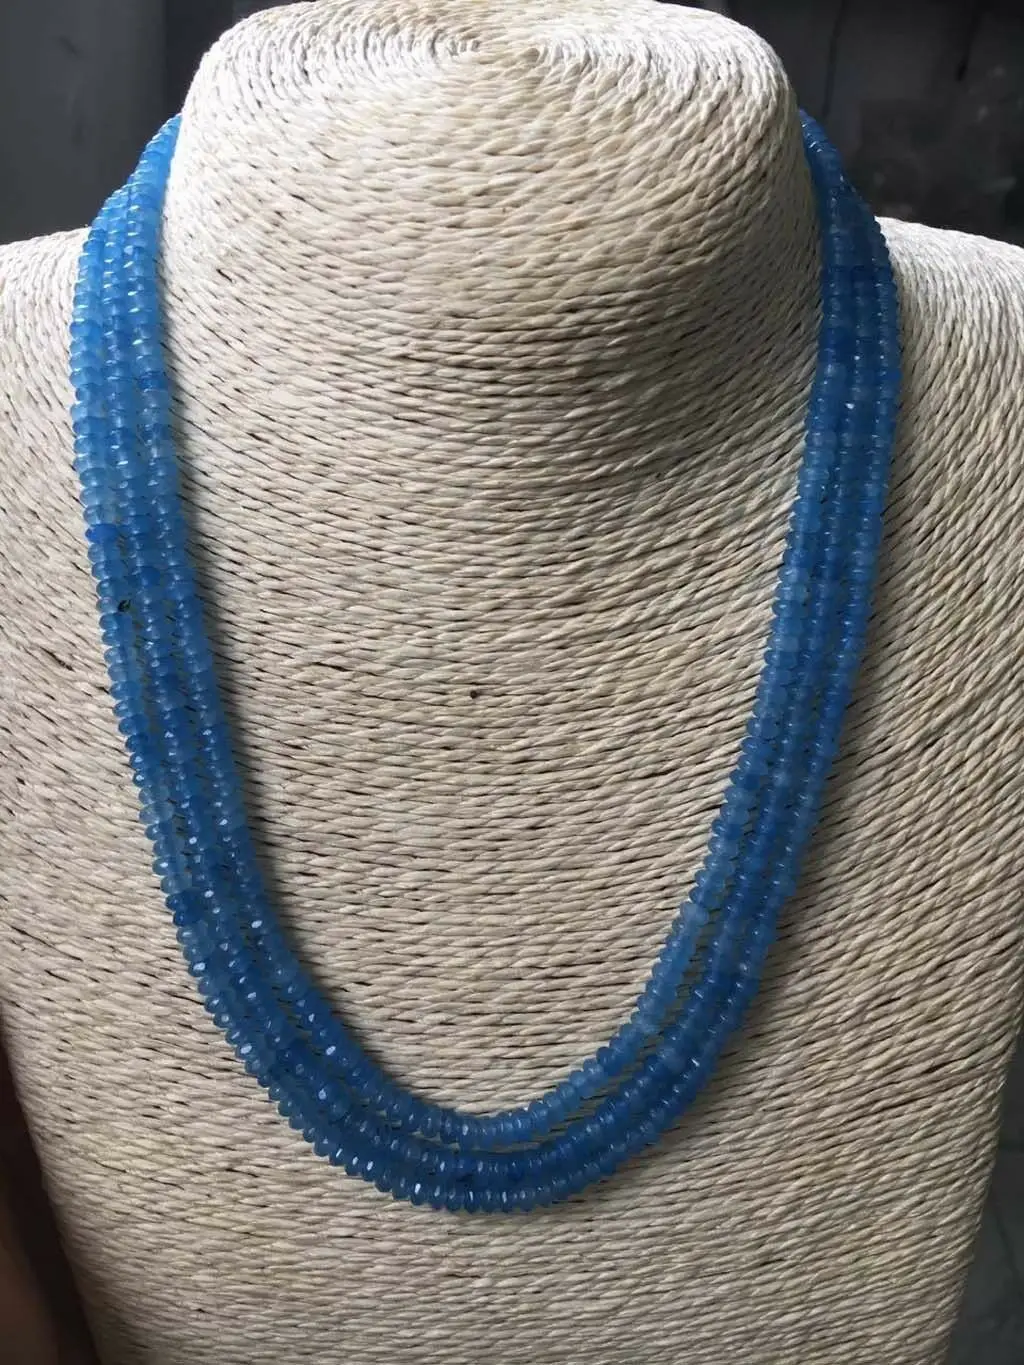 

GENUINE TOP NATURAL 3 Rows 2X4mm FACETED Aquamarine Blue jade BEADS NECKLACE 17-18"